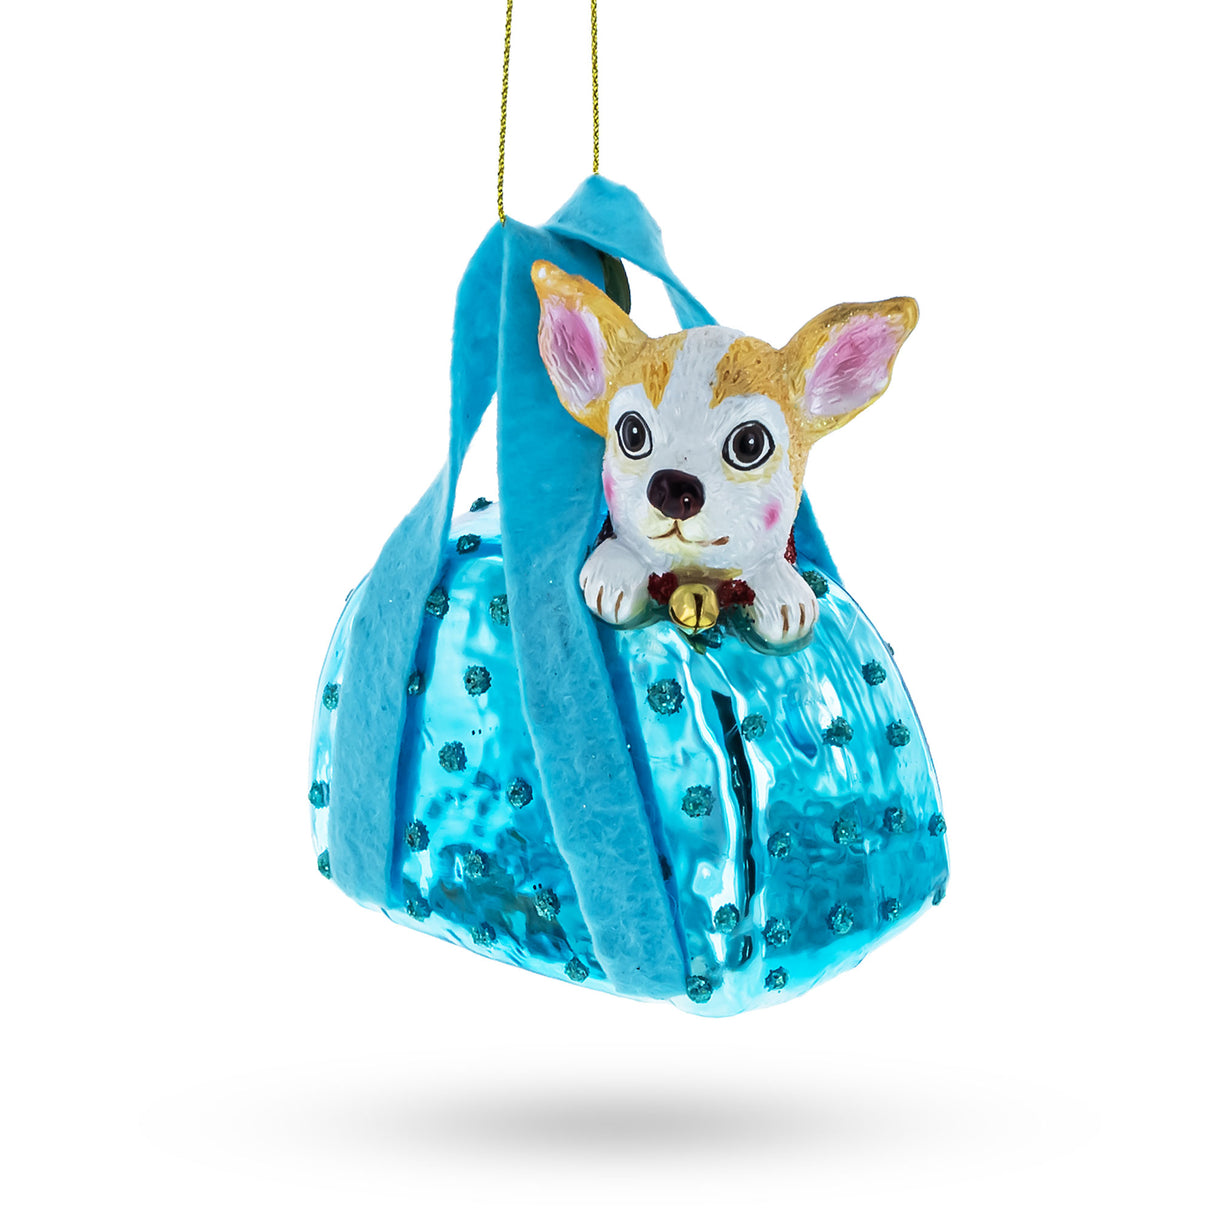 Glass Small Chihuahua Dog in Bag - Blown Glass Christmas Ornament in Blue color